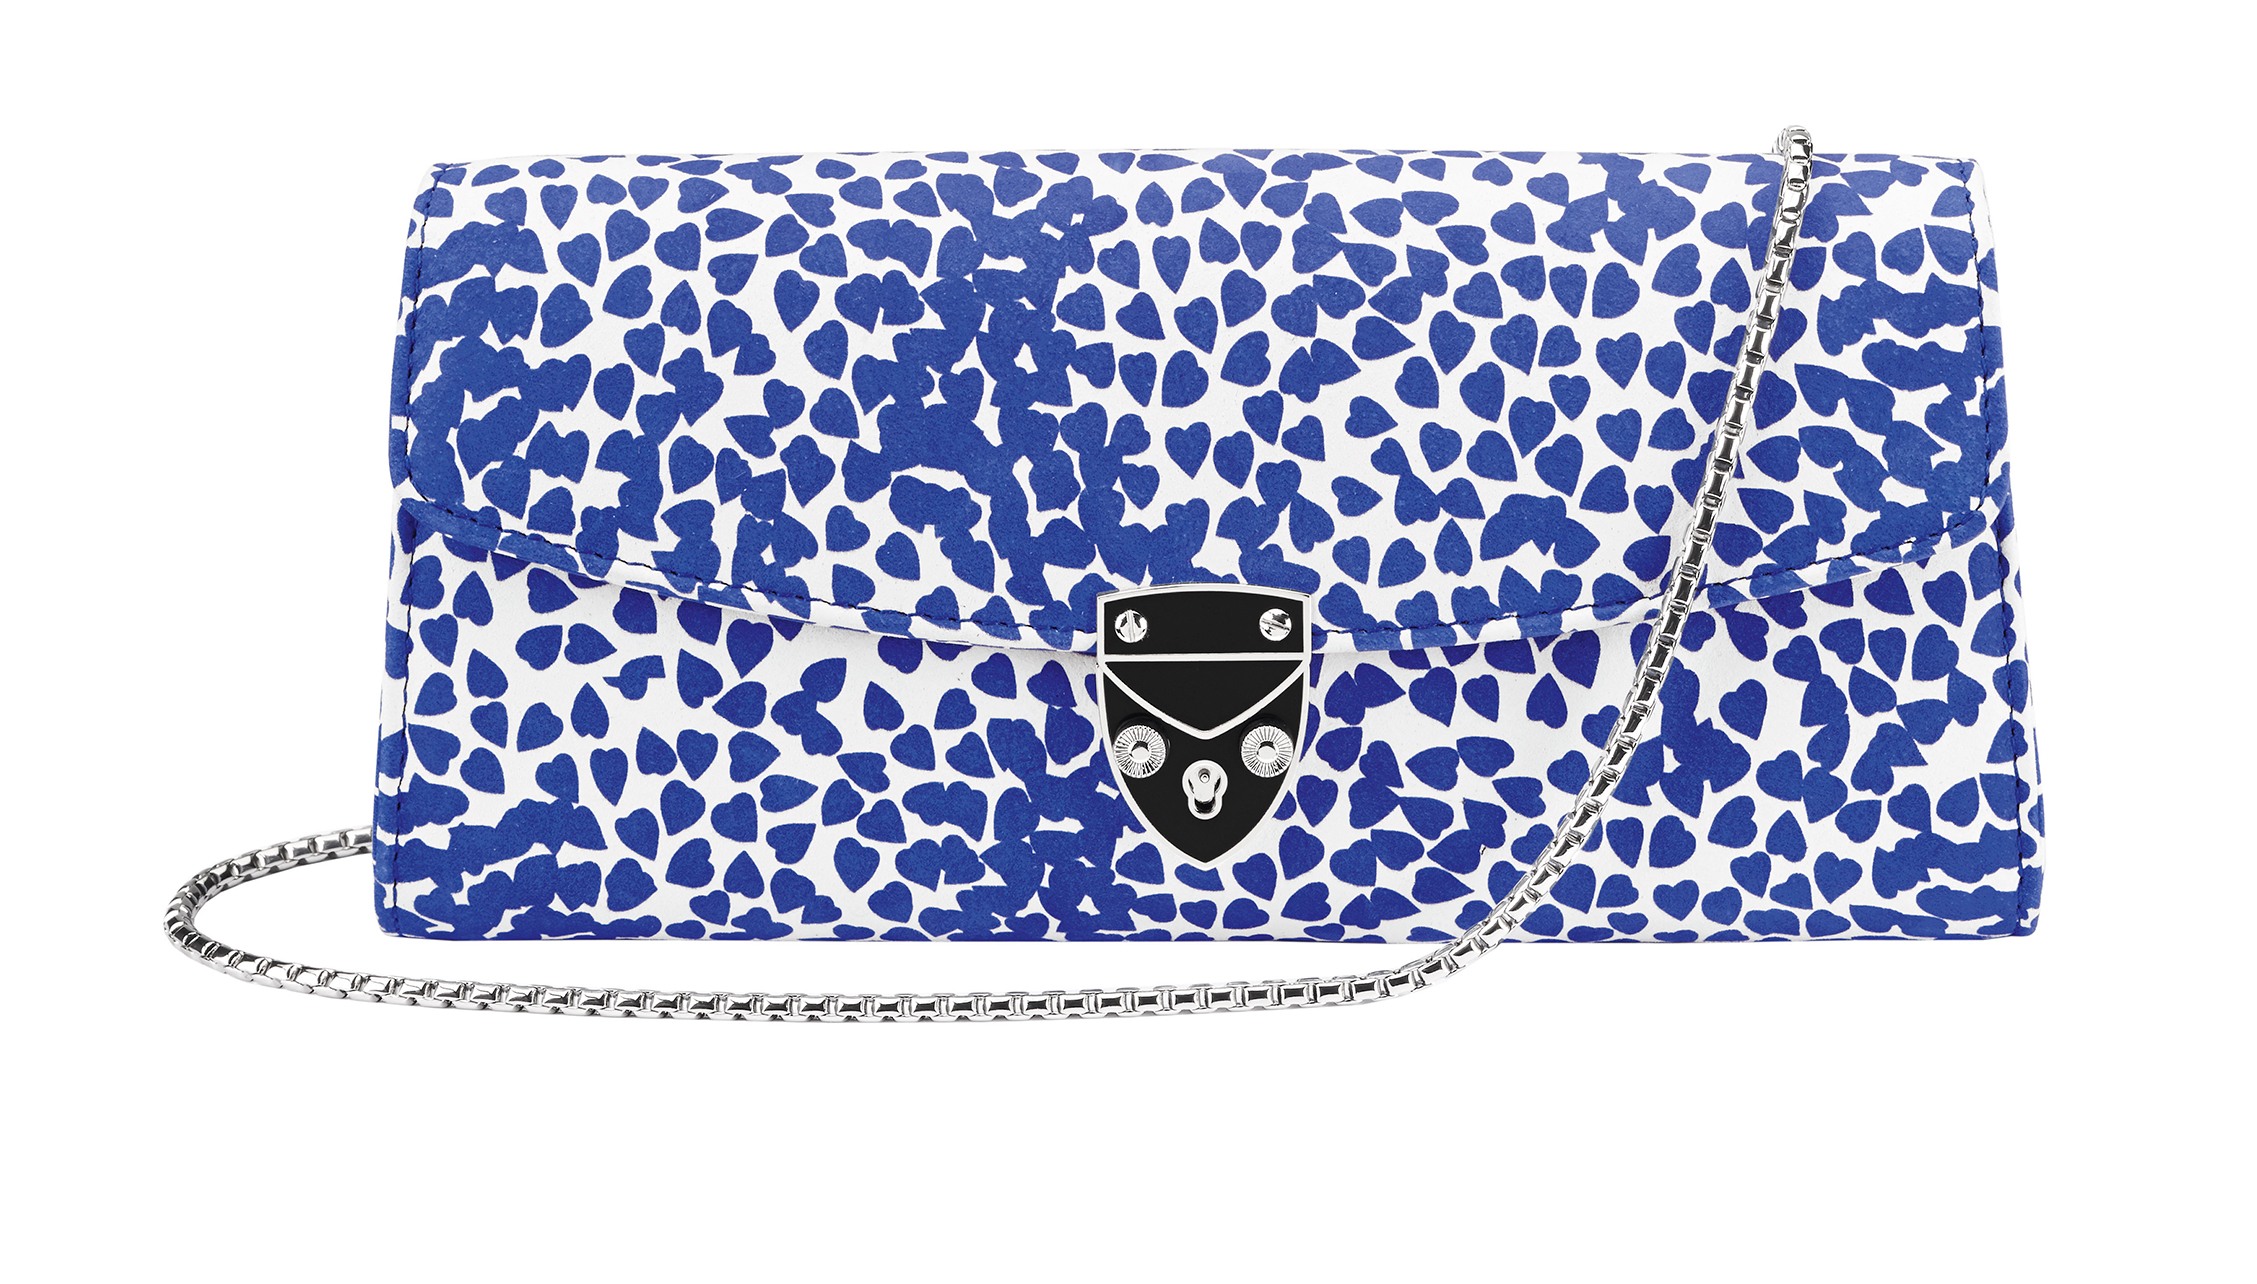 Glamour purse – our pick of wedding bags